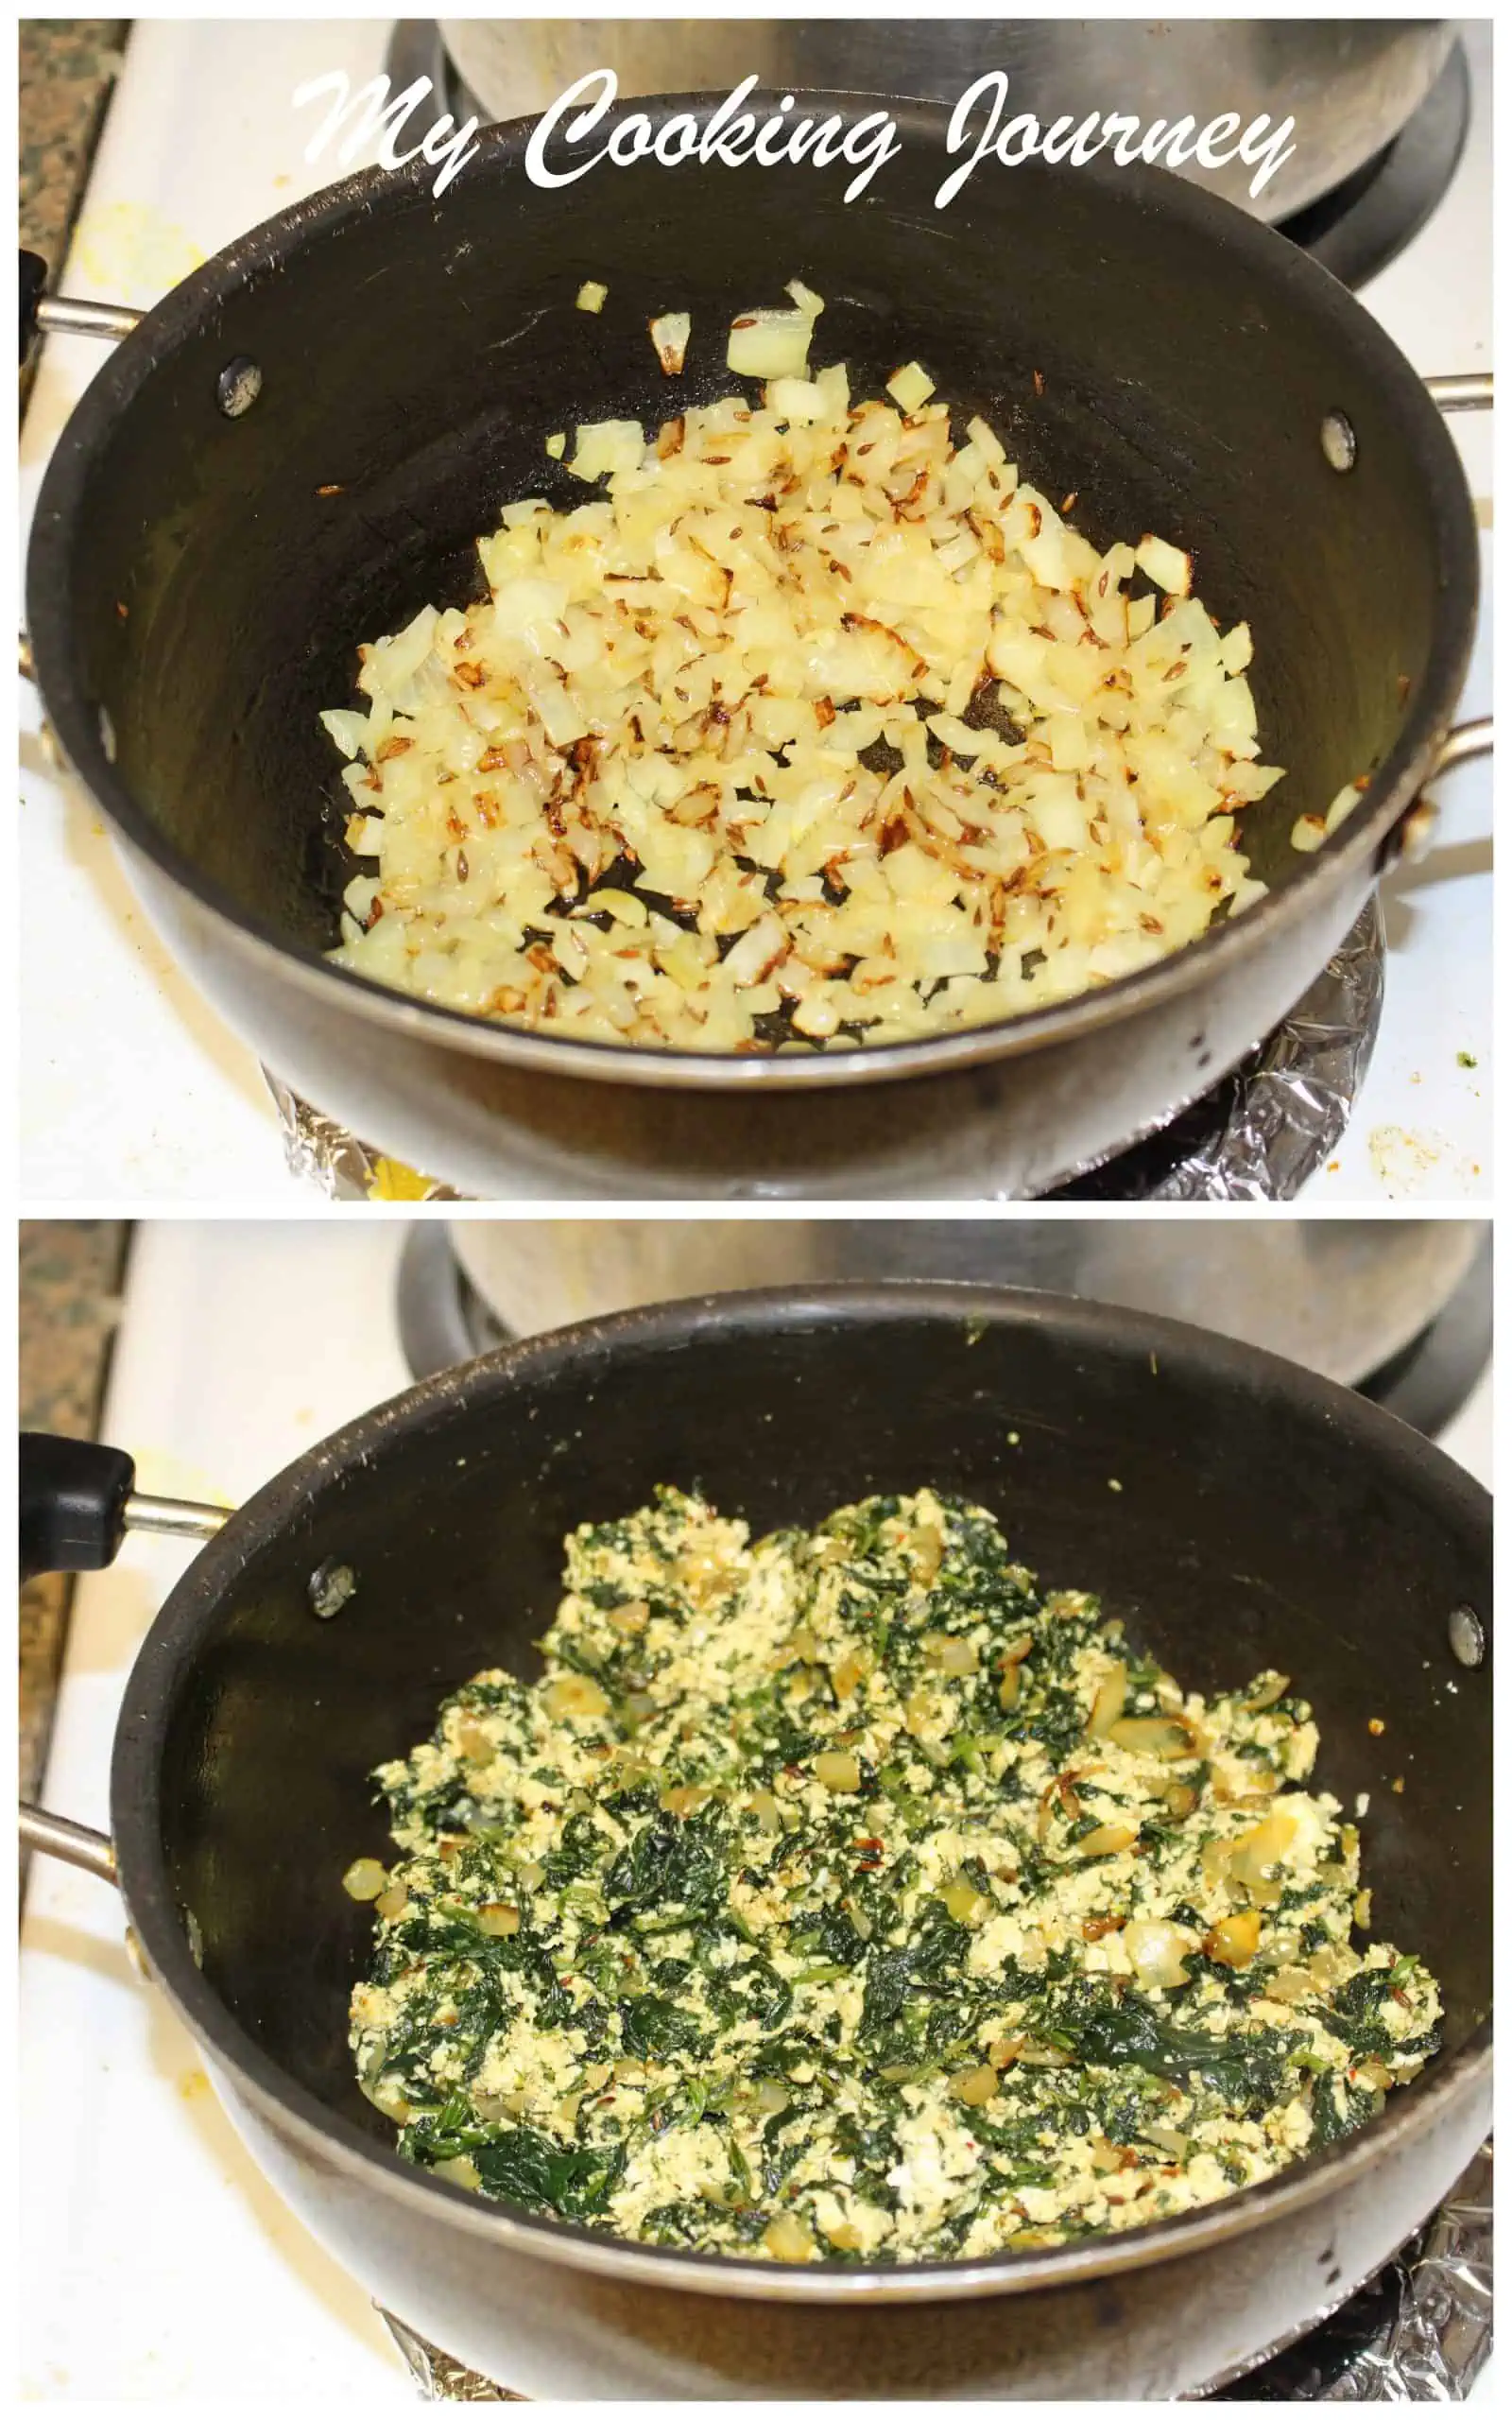 Frying the ingredients in a pan